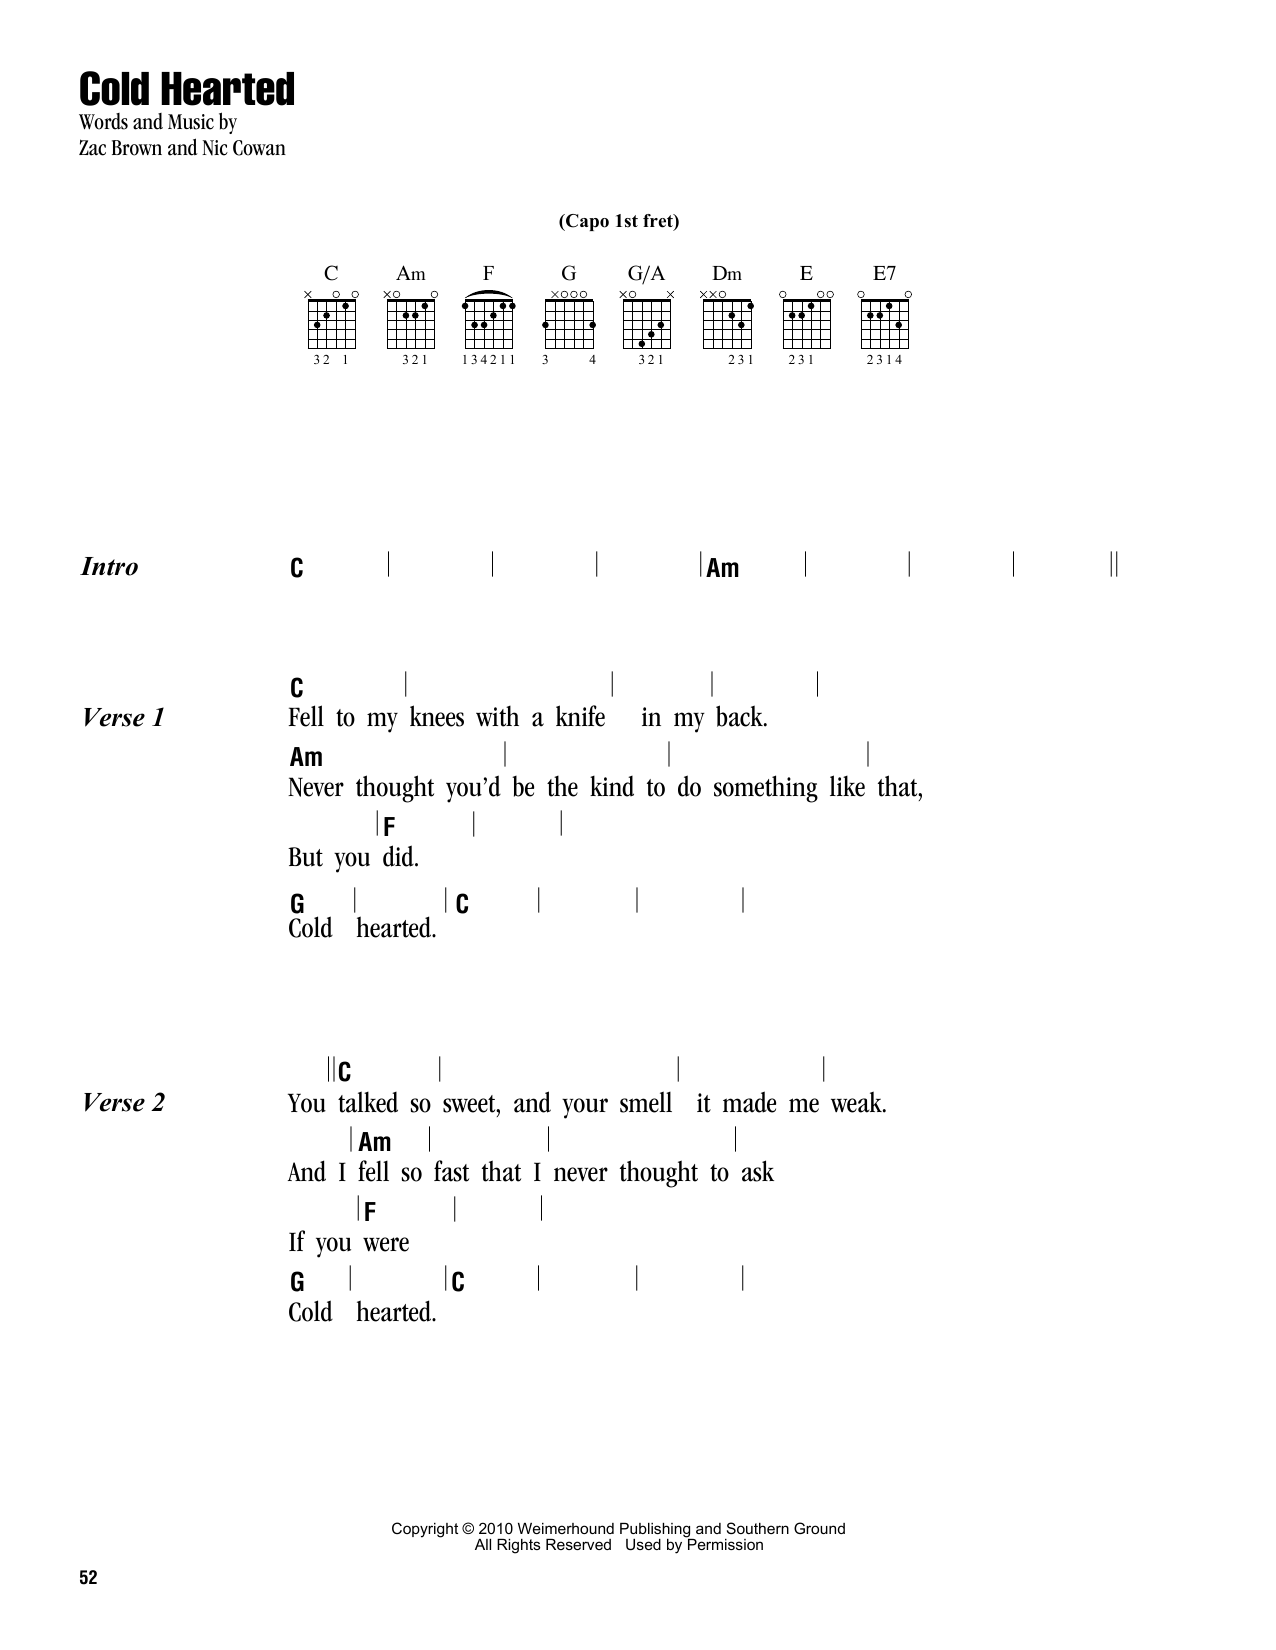 Download Zac Brown Band Cold Hearted Sheet Music